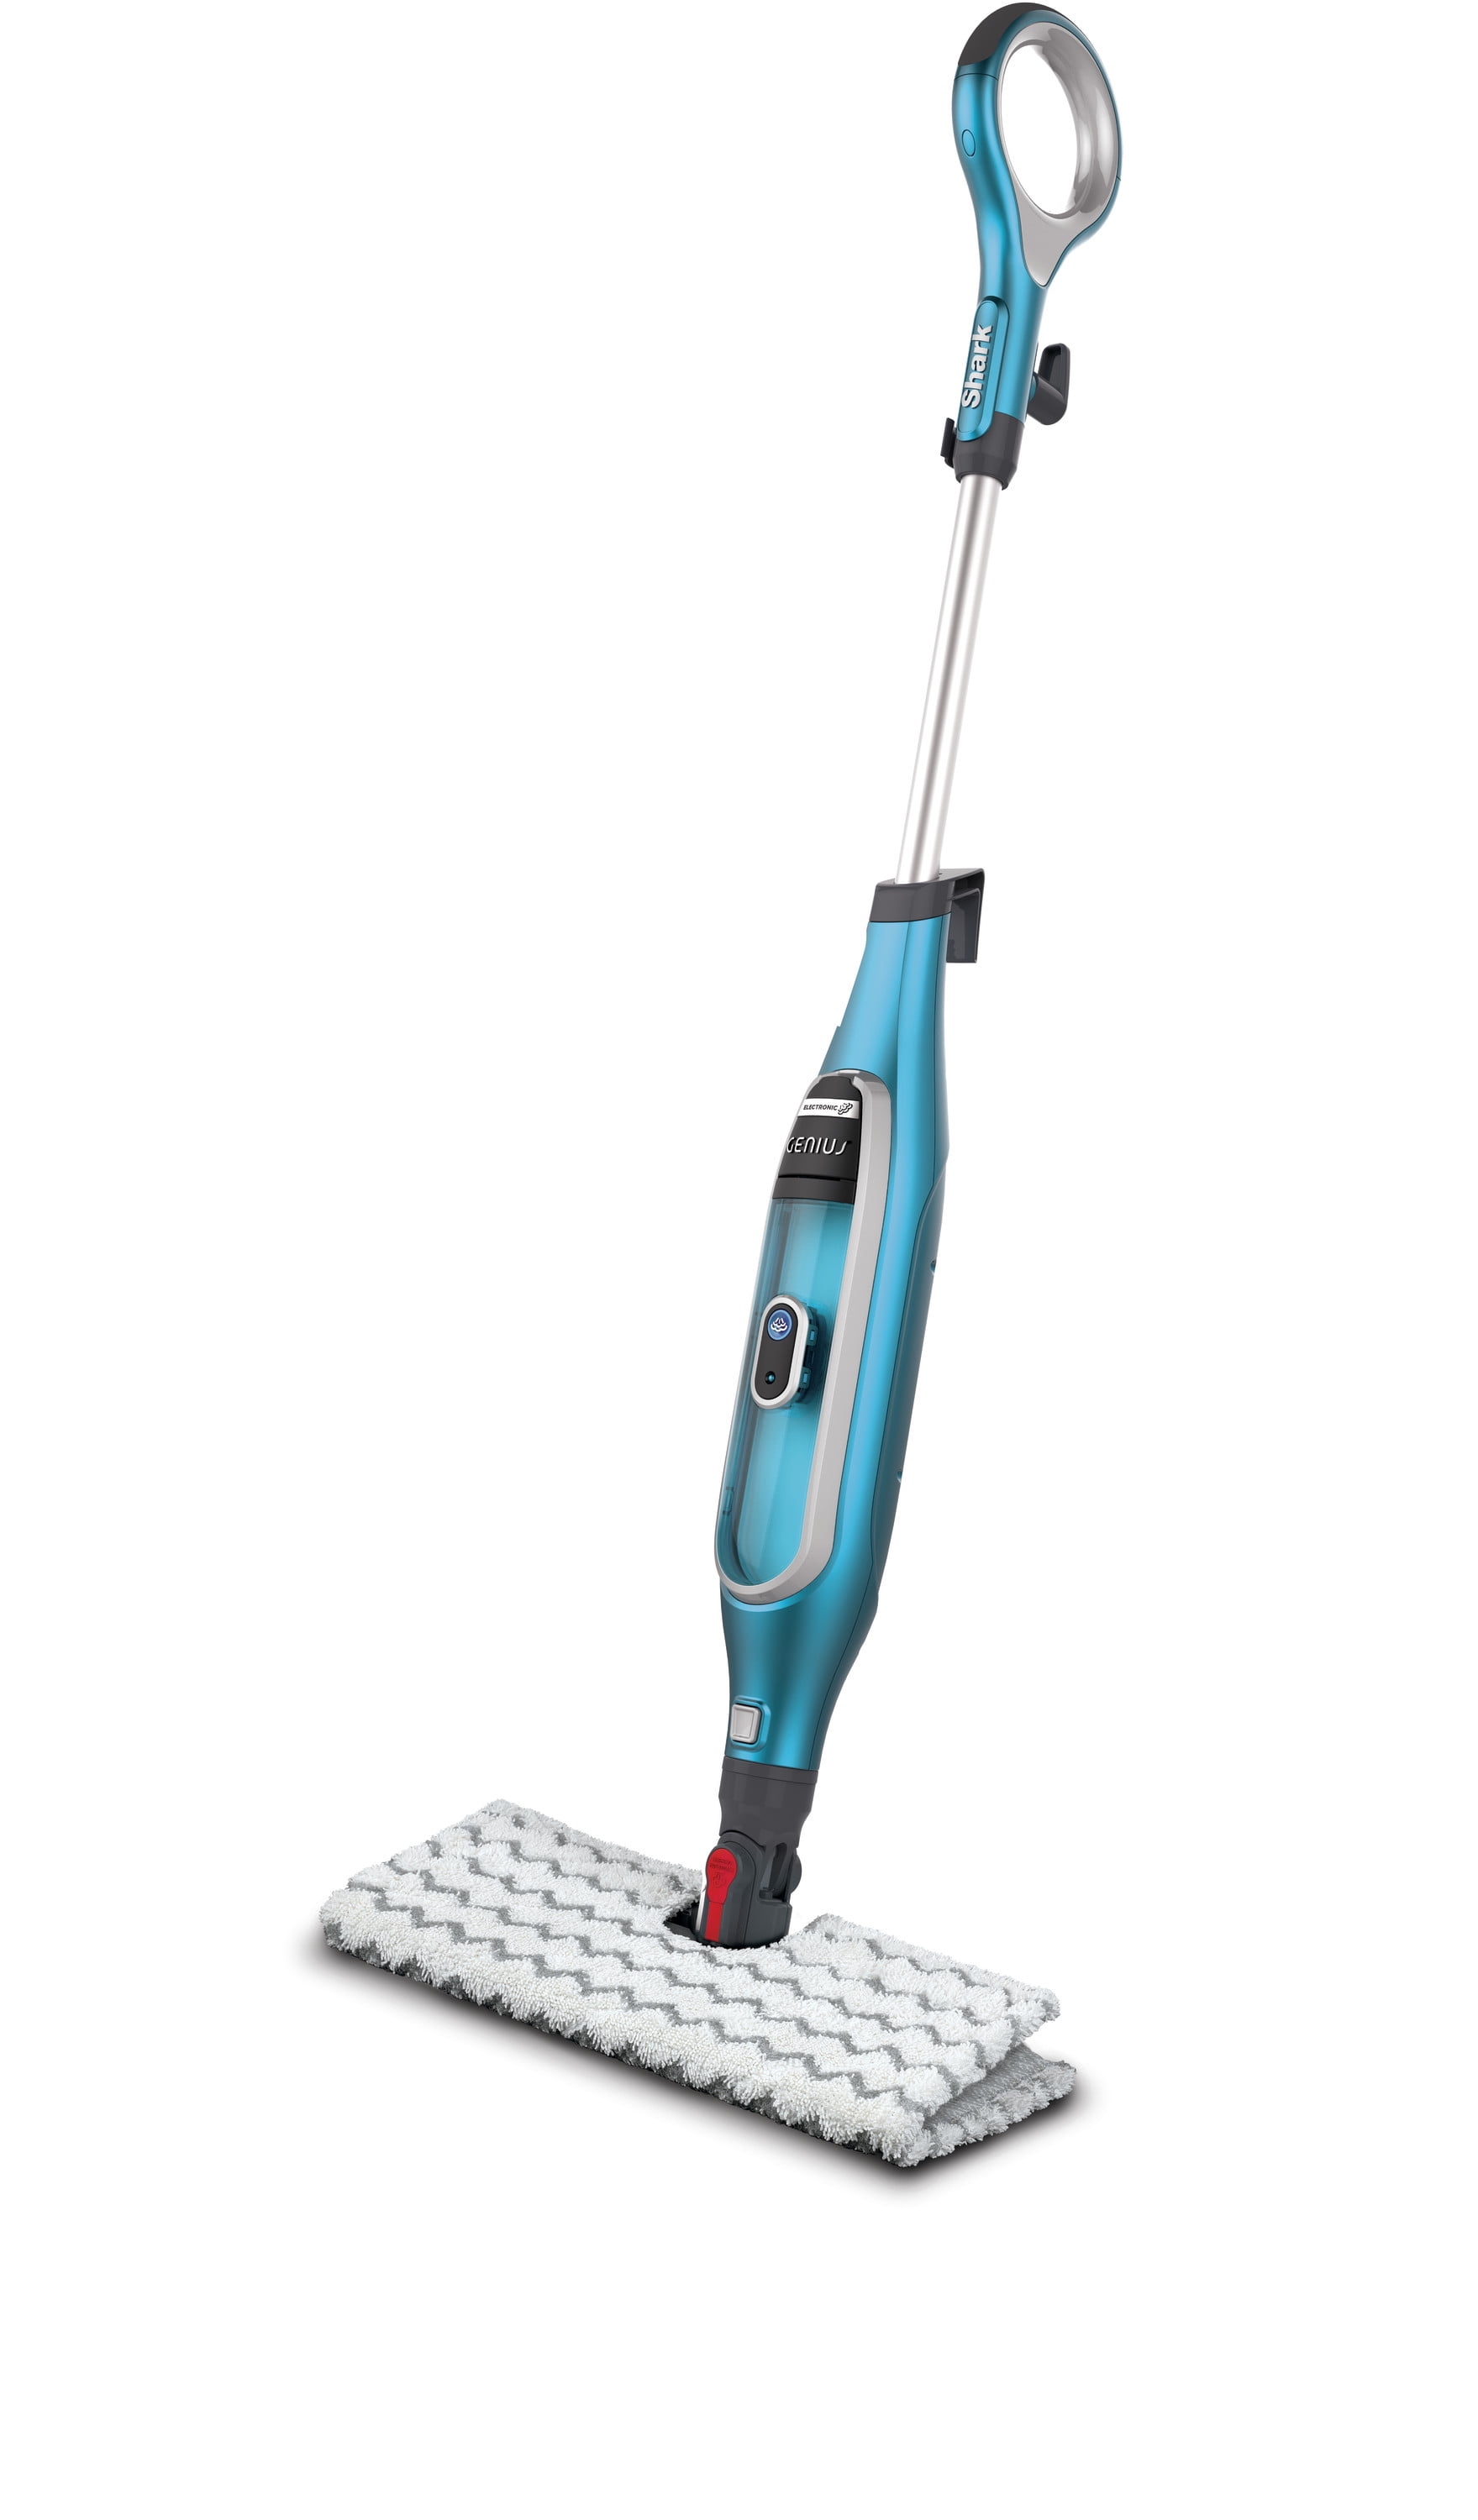 I Bought the Shark Steam Pocket Mop, and I Love It